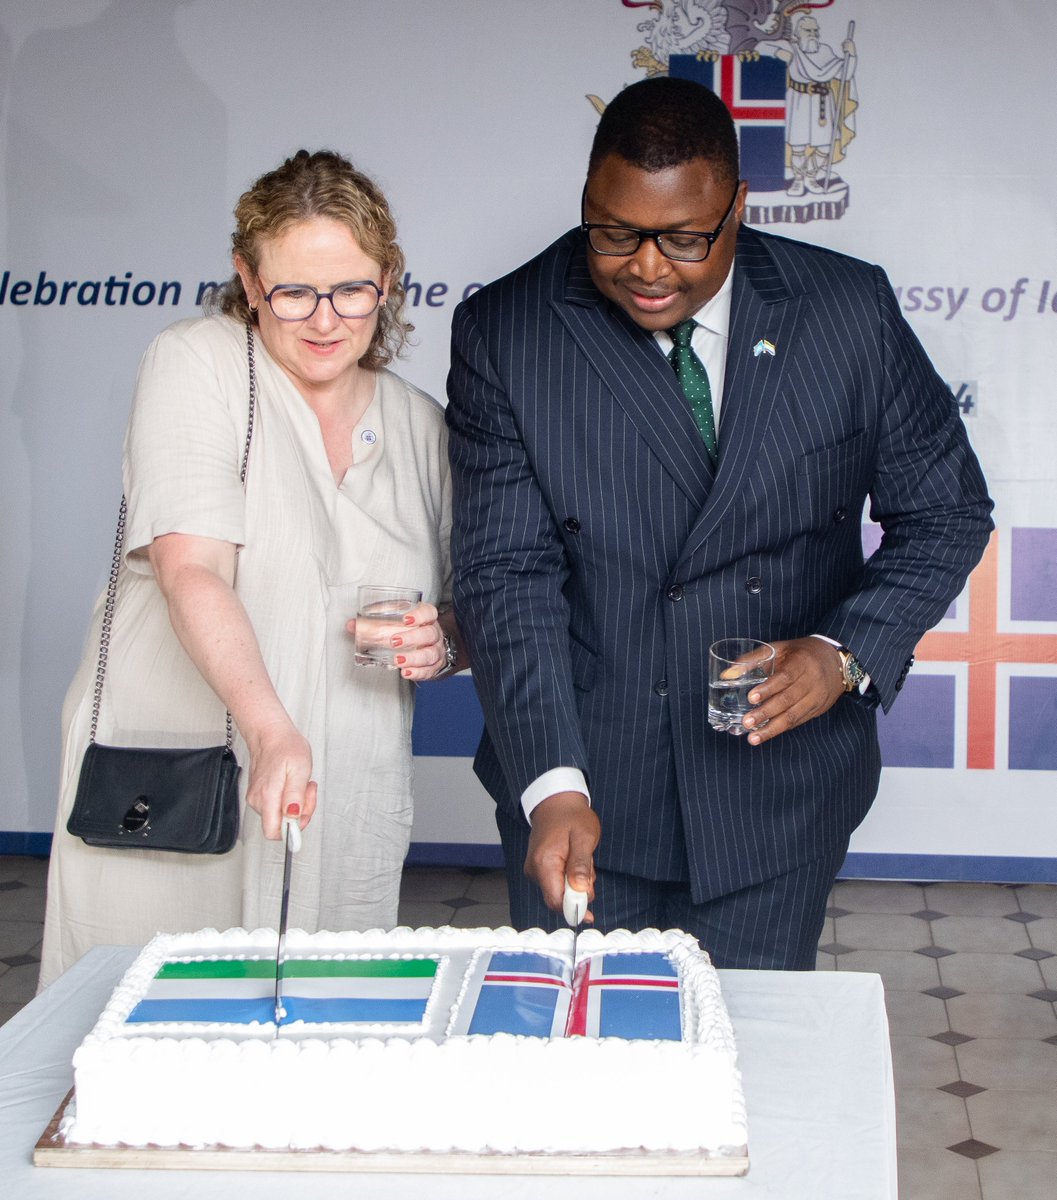 Sierra Leone is one of Iceland‘s key bilateral development partners. Yesterday 🇮🇸 formally opened its mission to 🇸🇱 in Freetown. A new chapter has begun, strengthening the collaboration and friendship between the two countries.